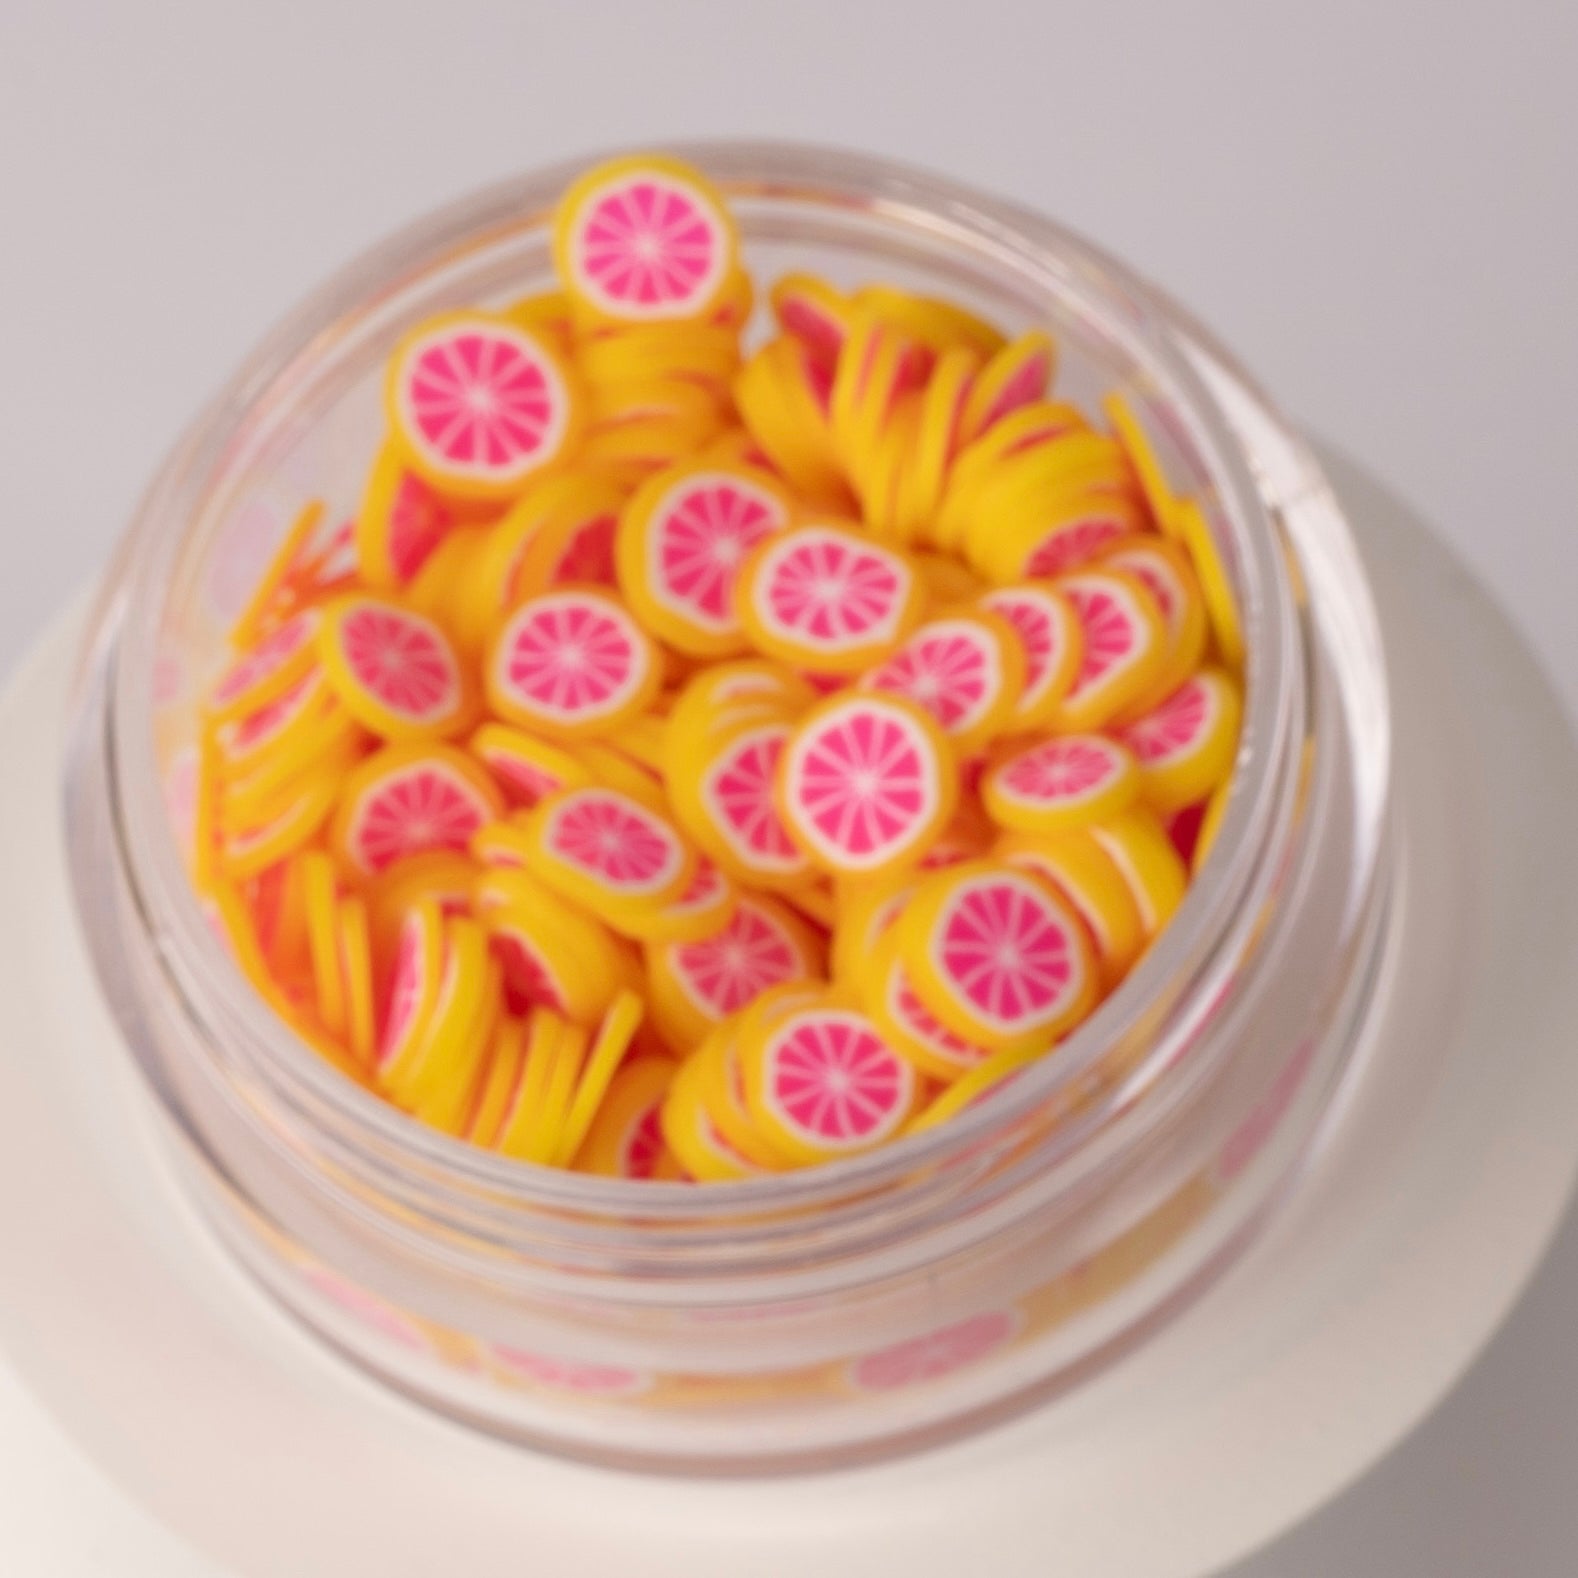 Mini grapefruit slices in clear jar on white background.